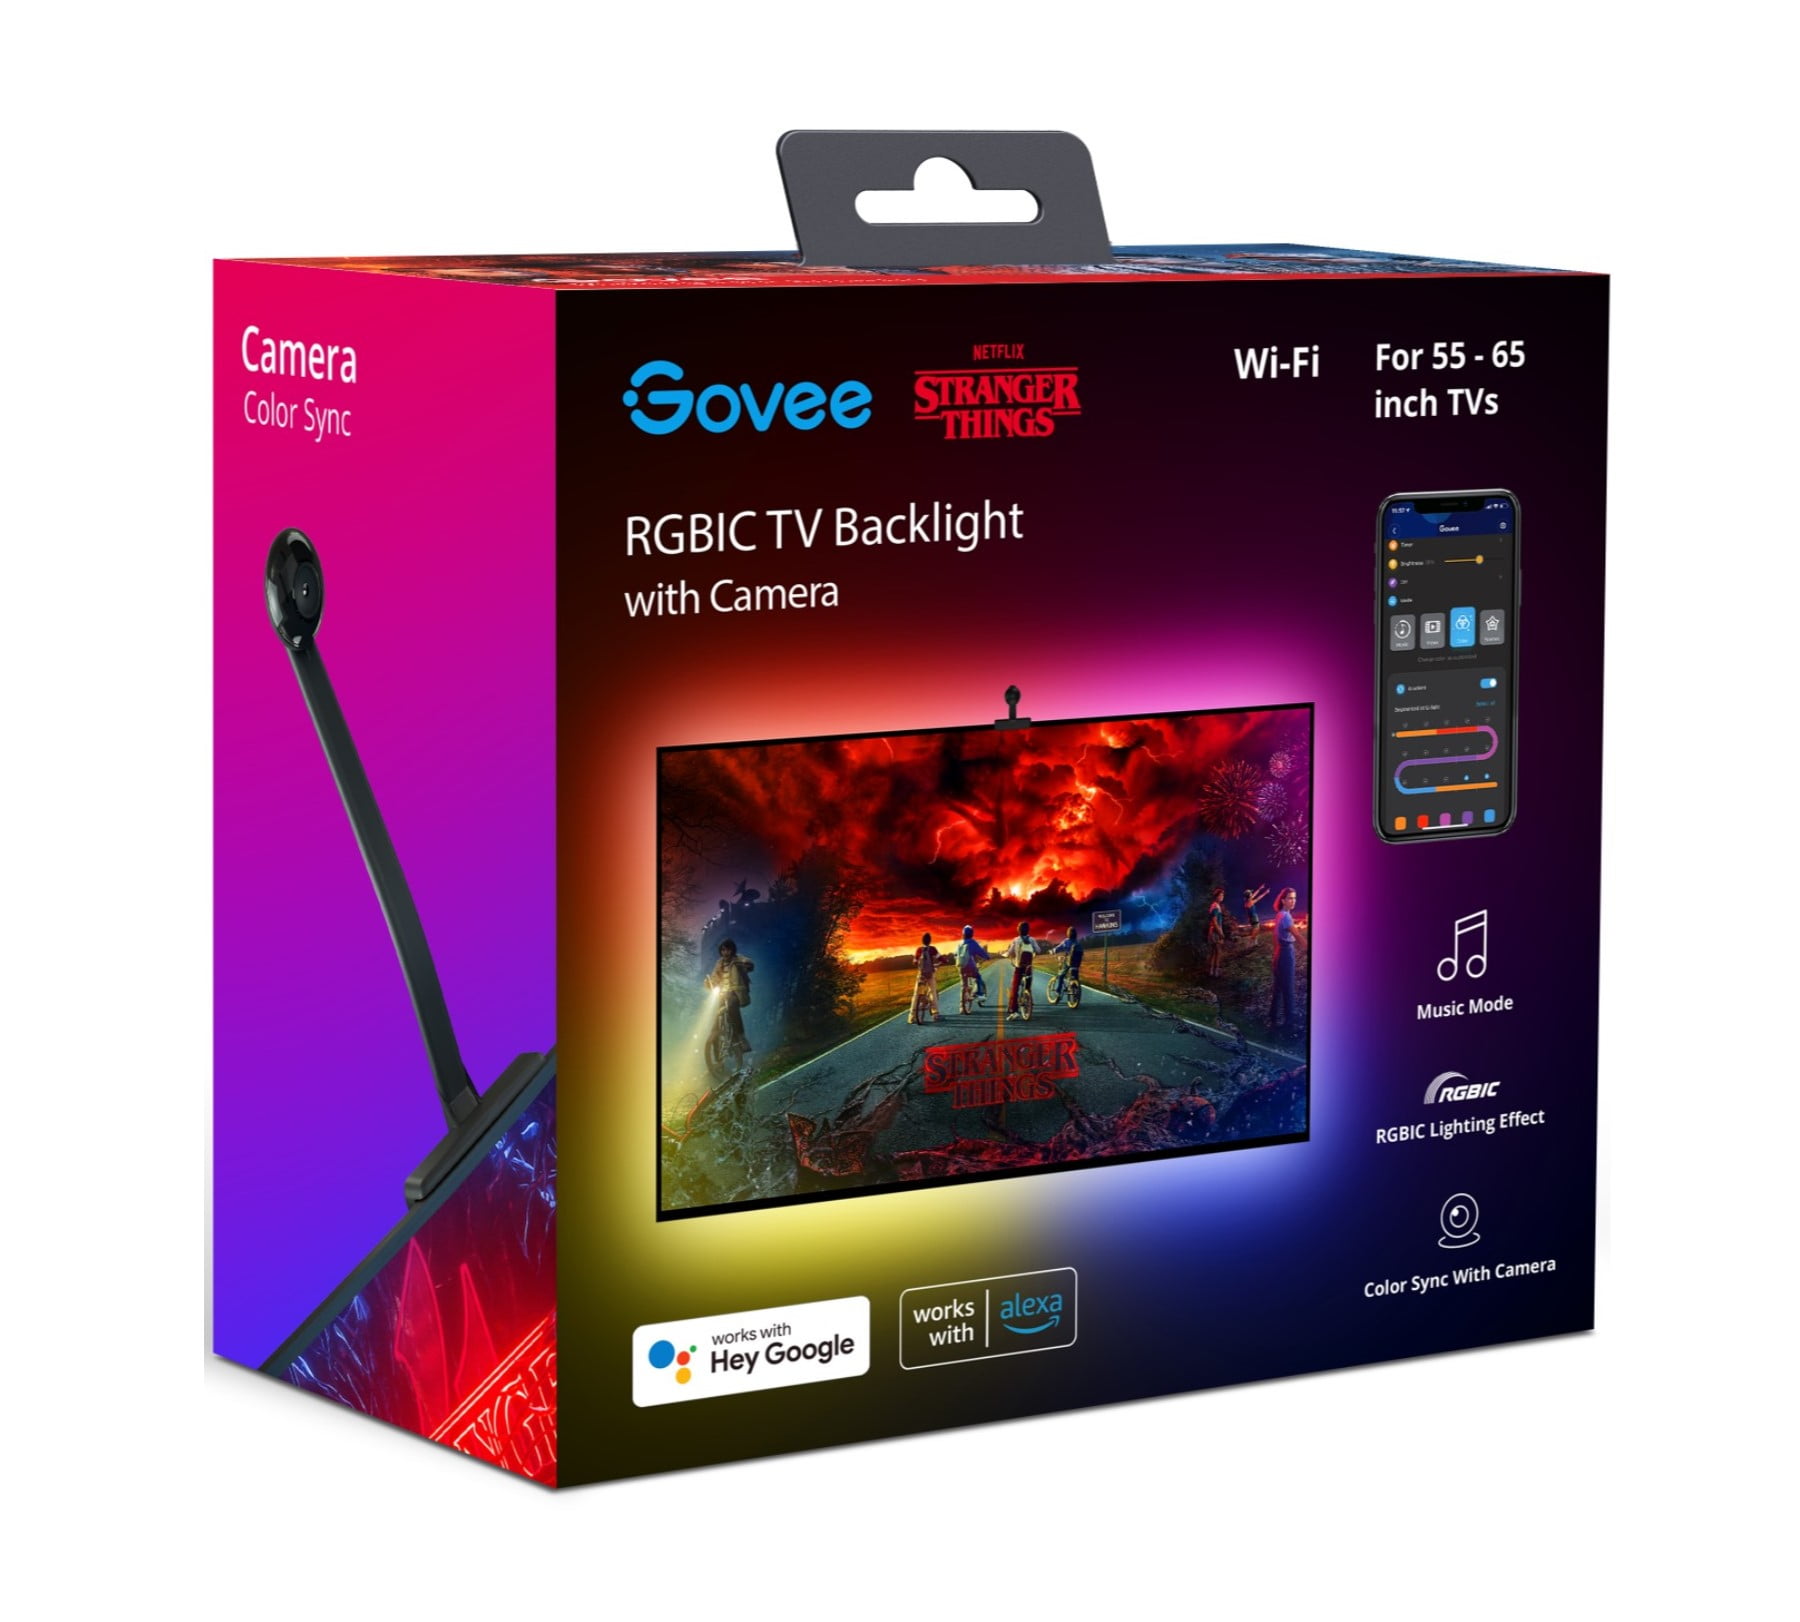 Govee Stranger Things indoor RGBIC LED TV Backlight with Camera